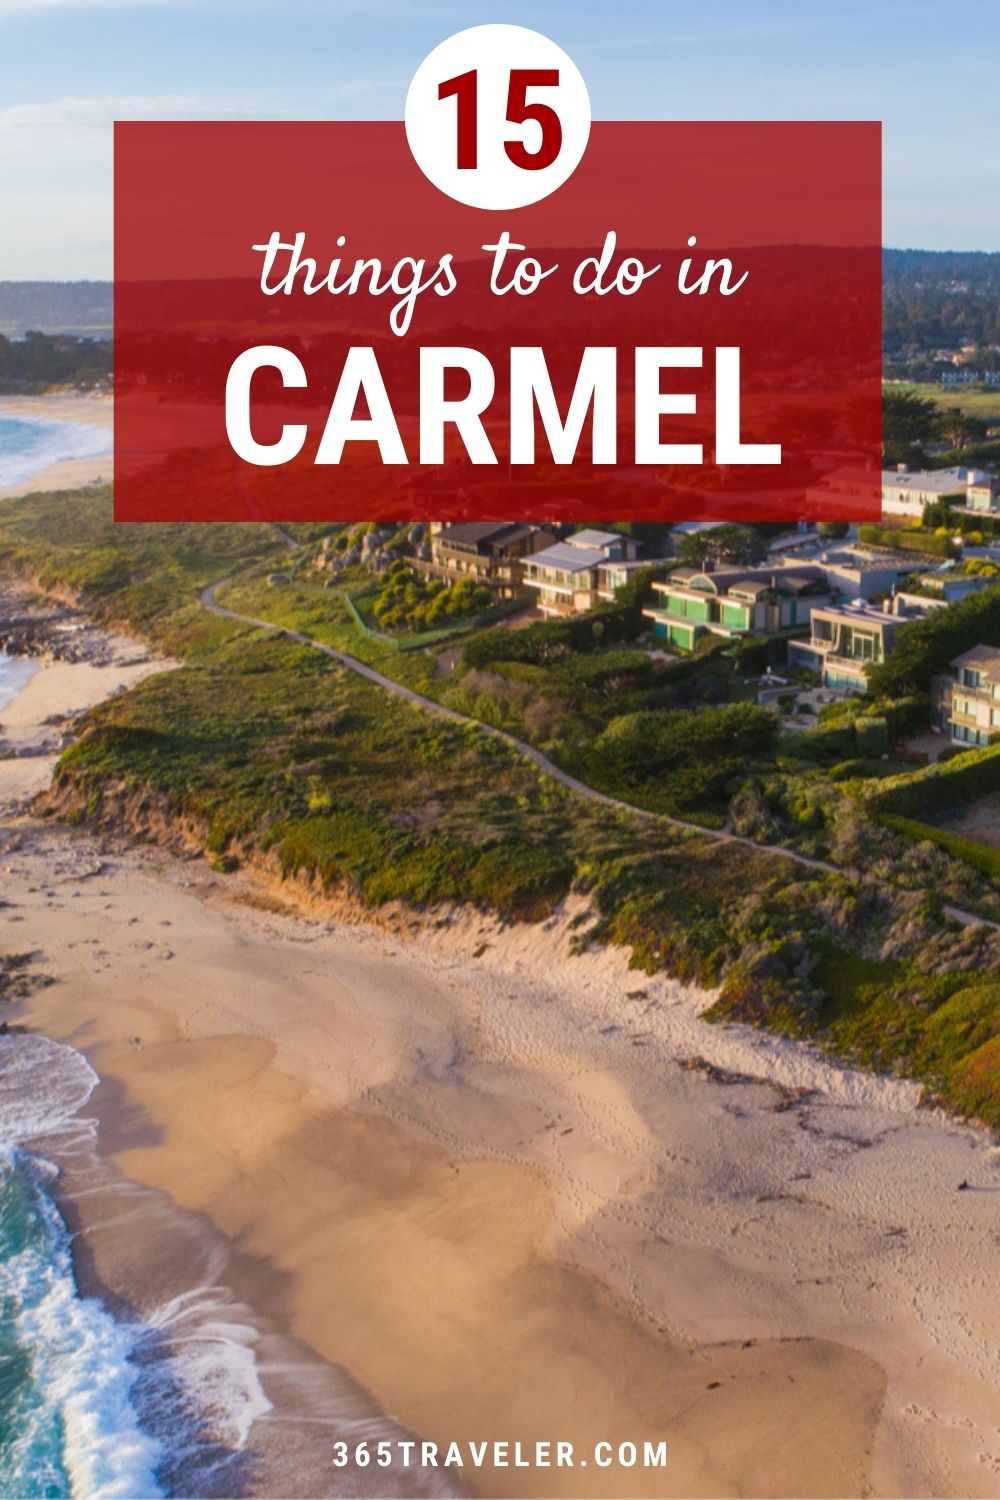 15 OUTSTANDING THINGS TO DO IN CARMEL, CALIFORNIA